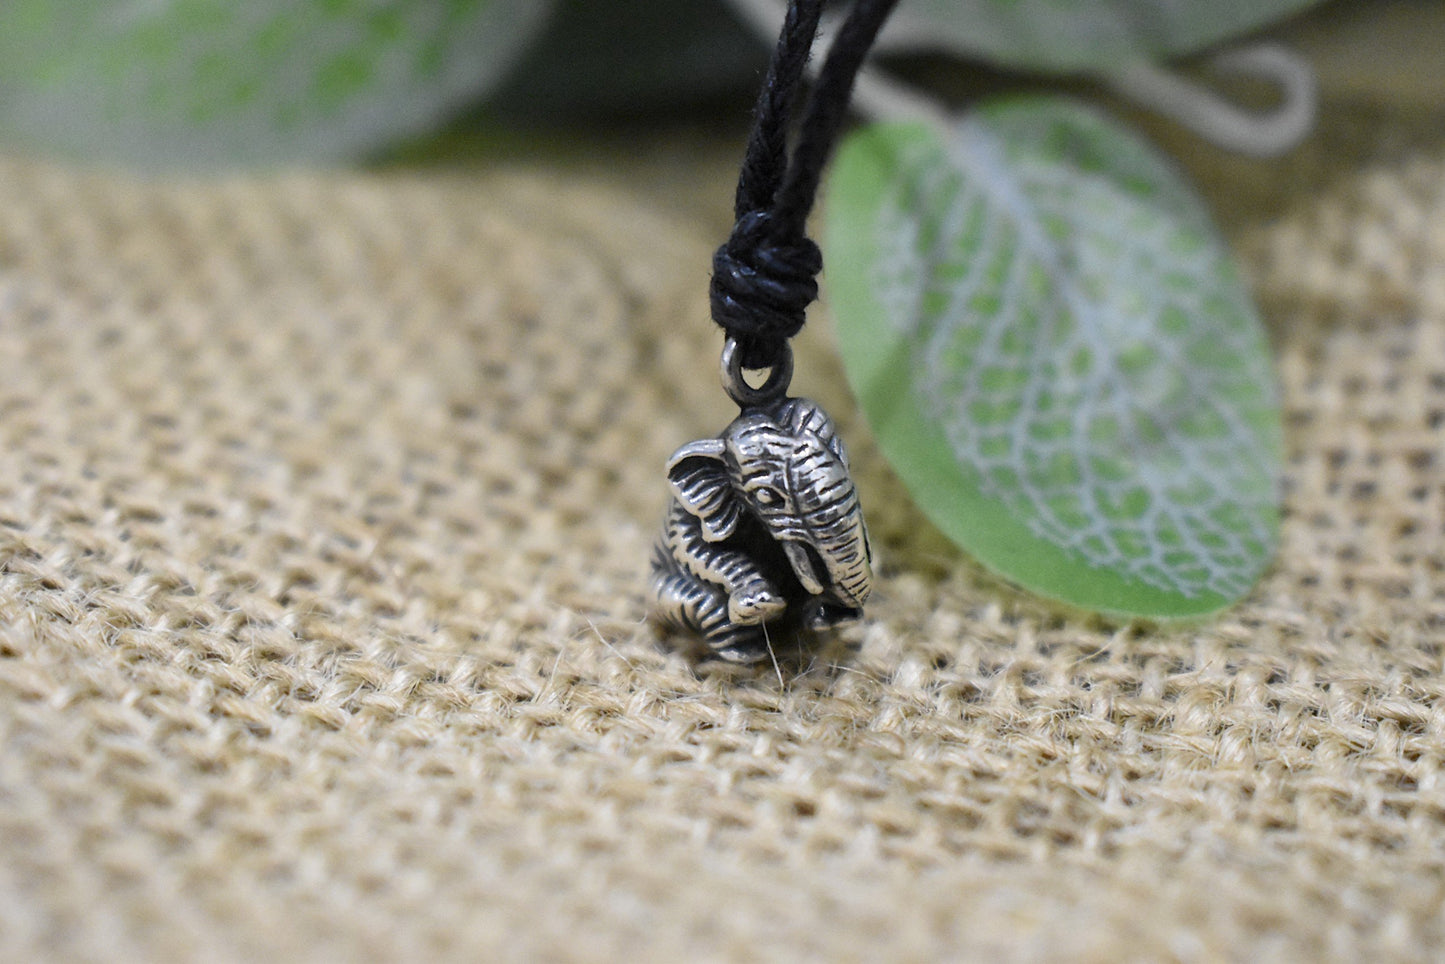 Sitting Elephant 92.5 Sterling Silver Gold Brass Necklace Pendant Jewelry